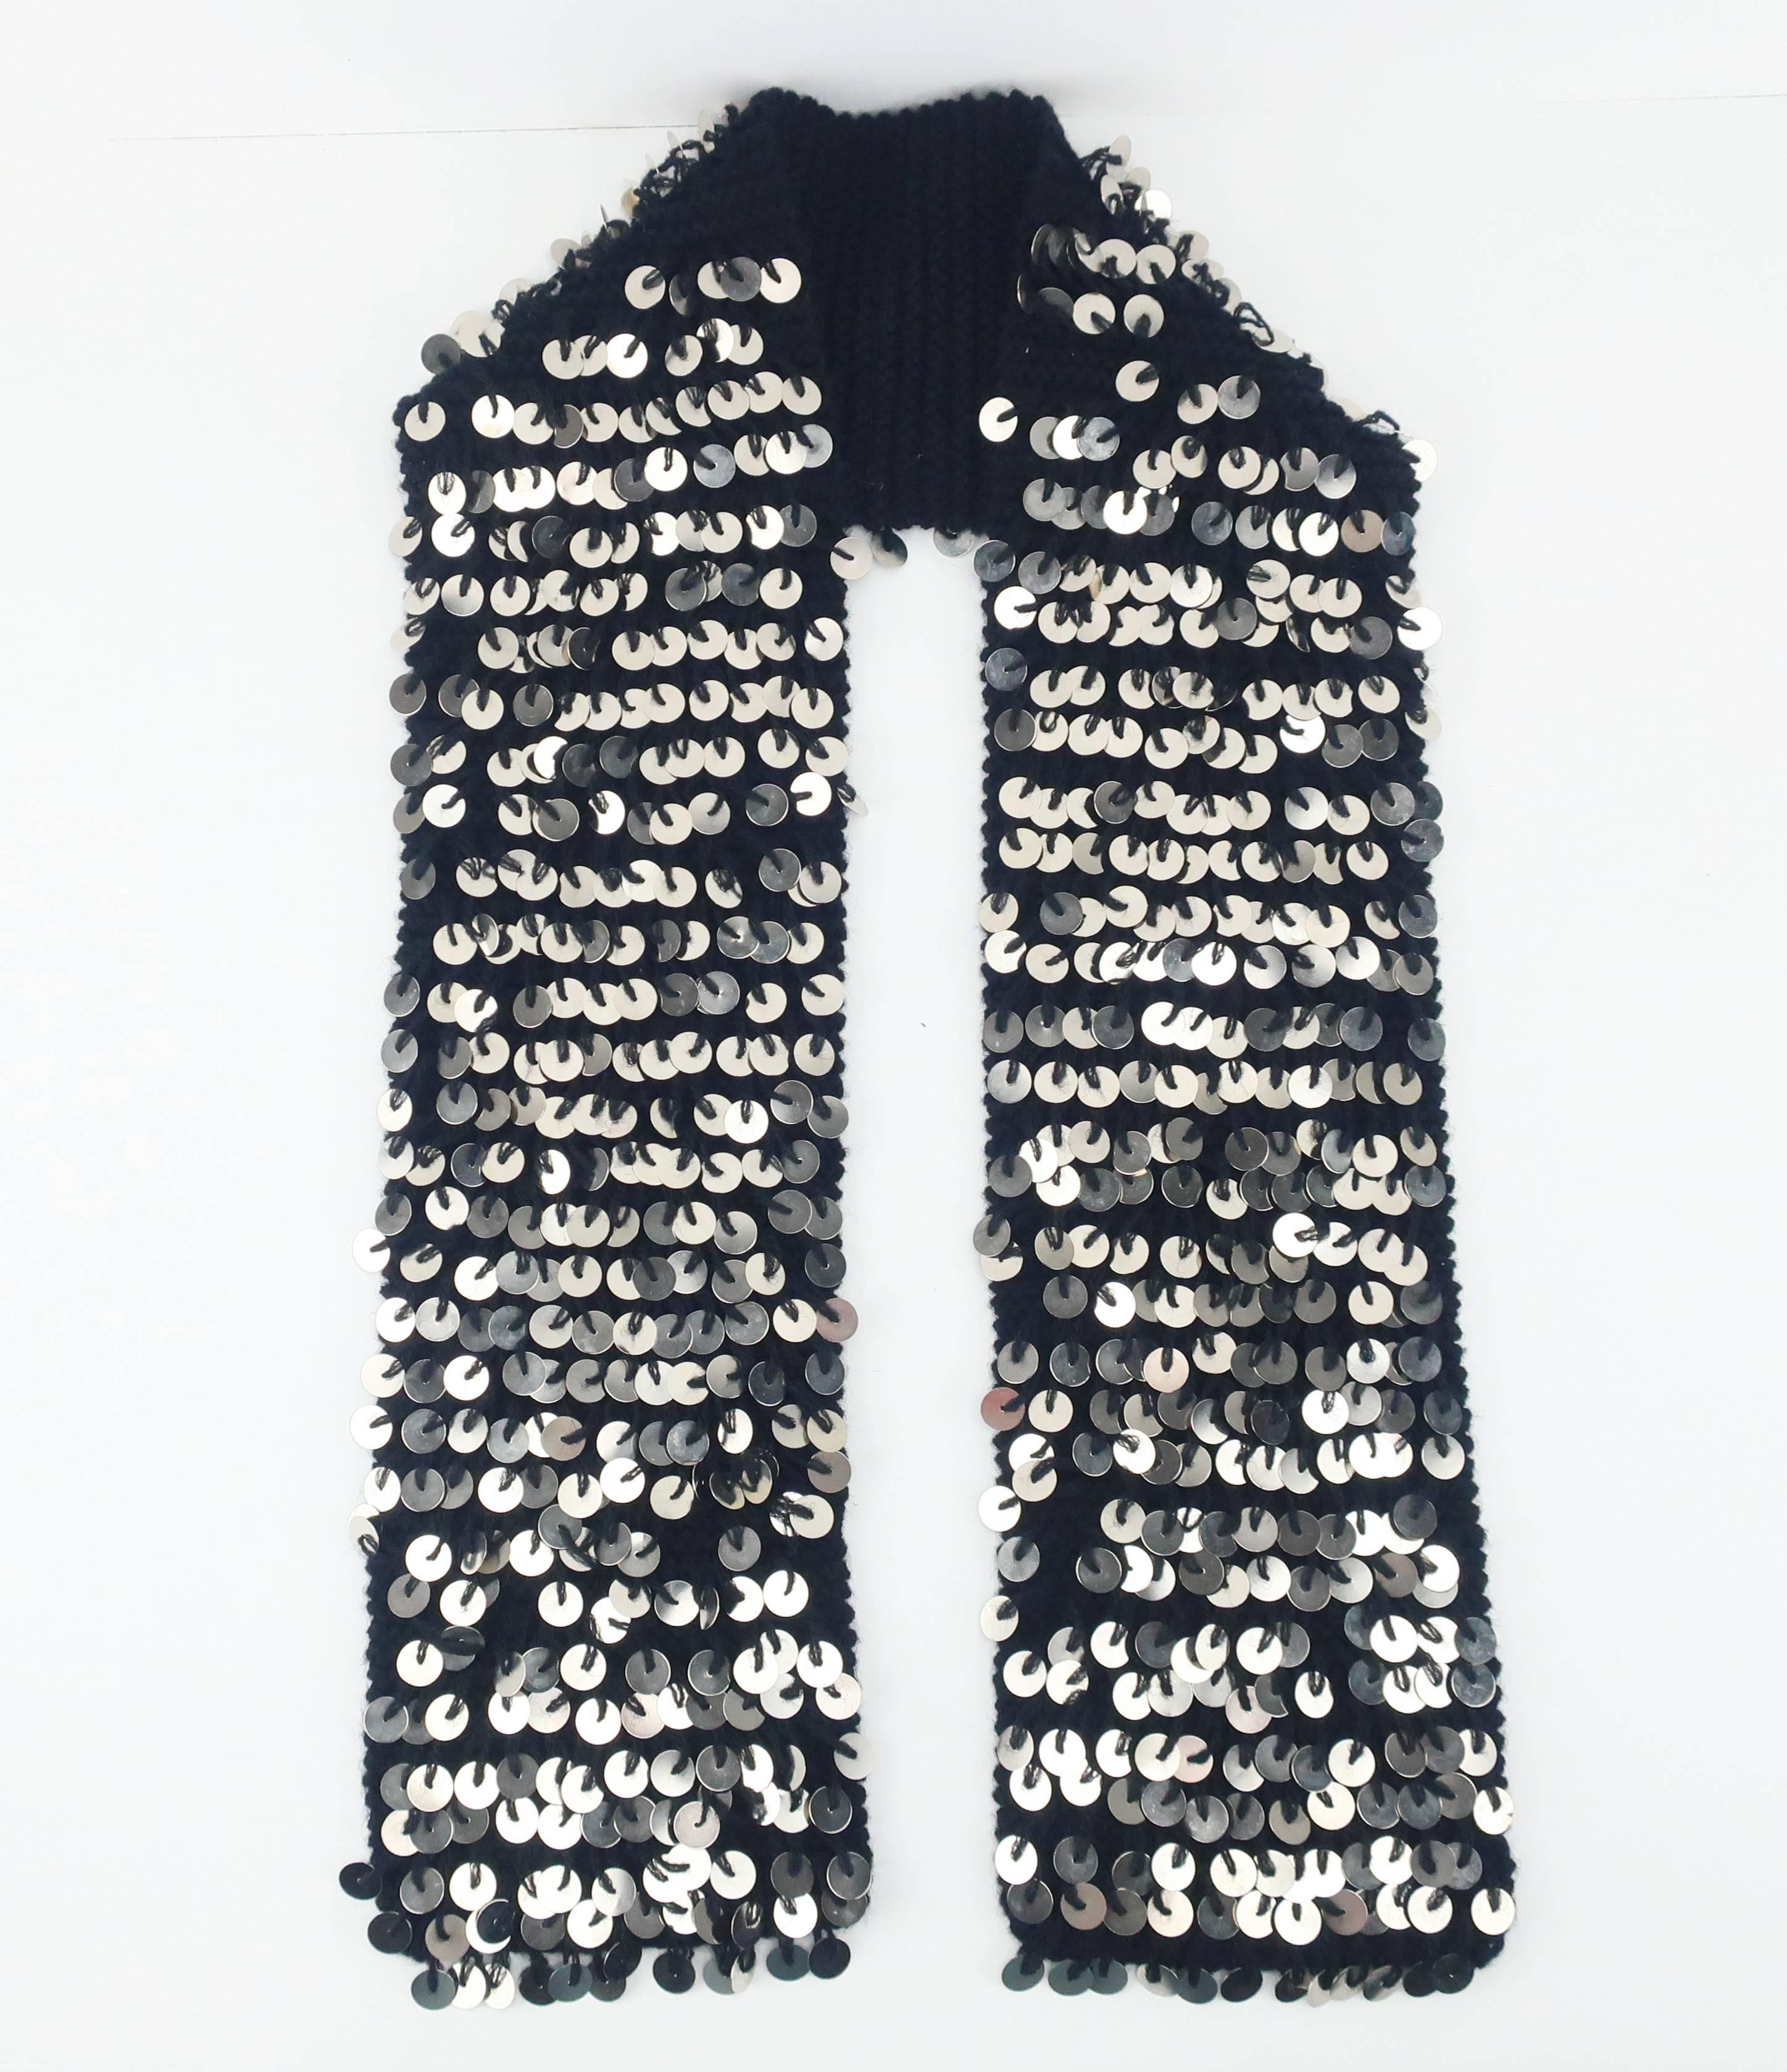 Sensory overload with this C.2000 black wool neck scarf in the form of look, feel and sound!  The silver medal medallions sewn onto the hand knitted scarf provide sweet sound effects akin to a charm bracelet.  They also catch the light and shimmer